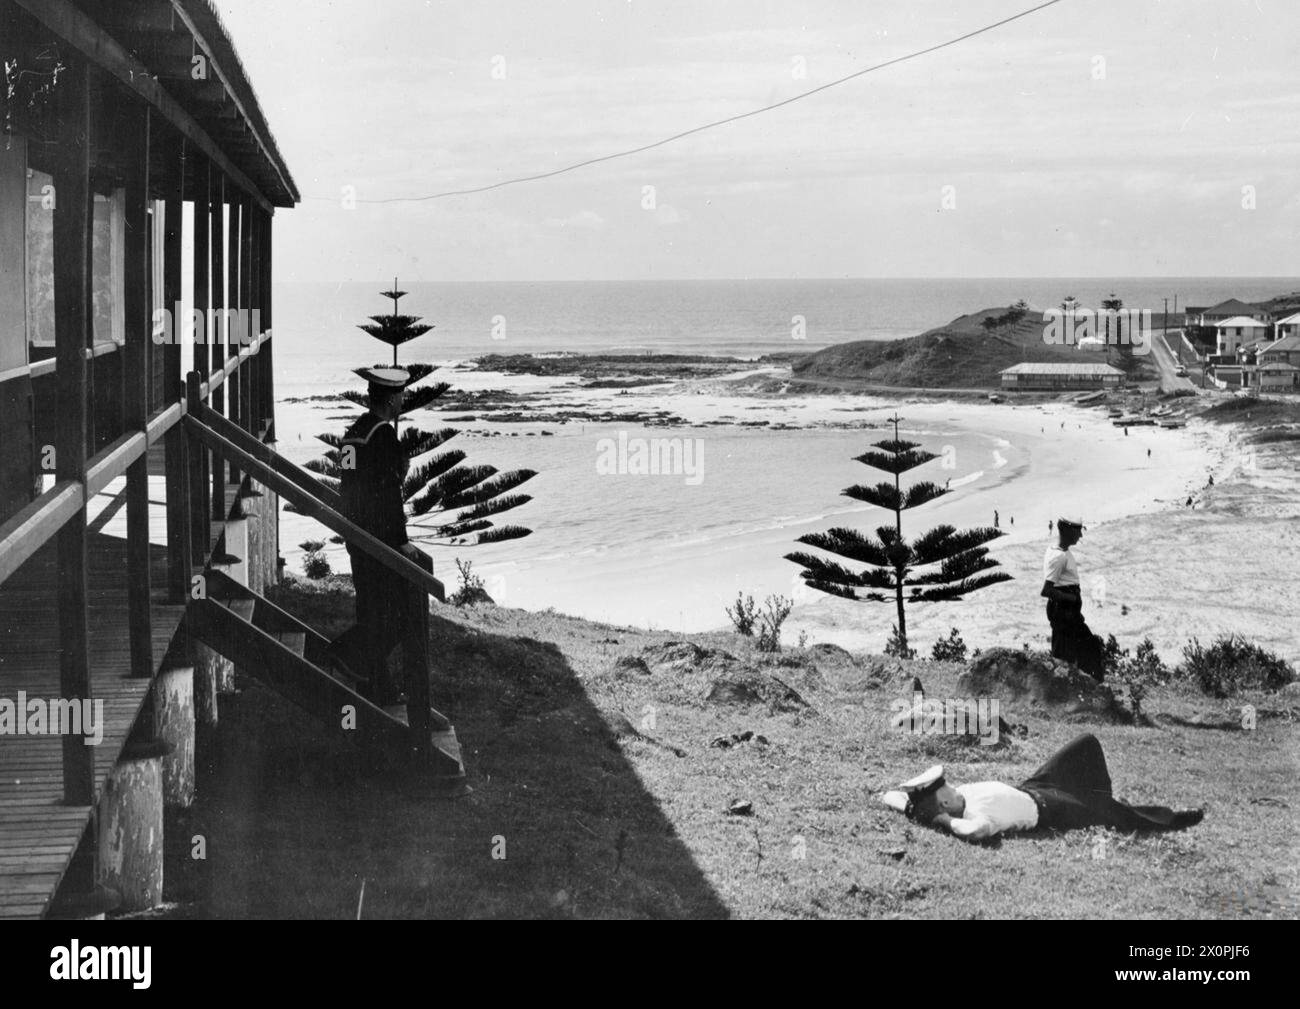 THE BRITISH NAVY ON HOLIDAY. AUGUST 1945, NAVAL REST CAMP, COOLANGATTA, QUEENSLAND, AUSTRALIA. NAVAL RATINGS ARE ABLE TO ENJOY A WELL-EARNED HOLIDAY AT COOLANGATTA, A FREE HOLIDAY CAMP WITH ALL THE AMENITIES OF A FIRST-CLASS CIVILIAN ORGANISATION. IT IS ALSO USED AS A CONVALESCENT CENTRE BY PATIENTS FROM THE ROYAL NAVAL HOSPITAL, BRISBANE. - Peace at Coolangatta, overlooking Greenmount Bay Stock Photo